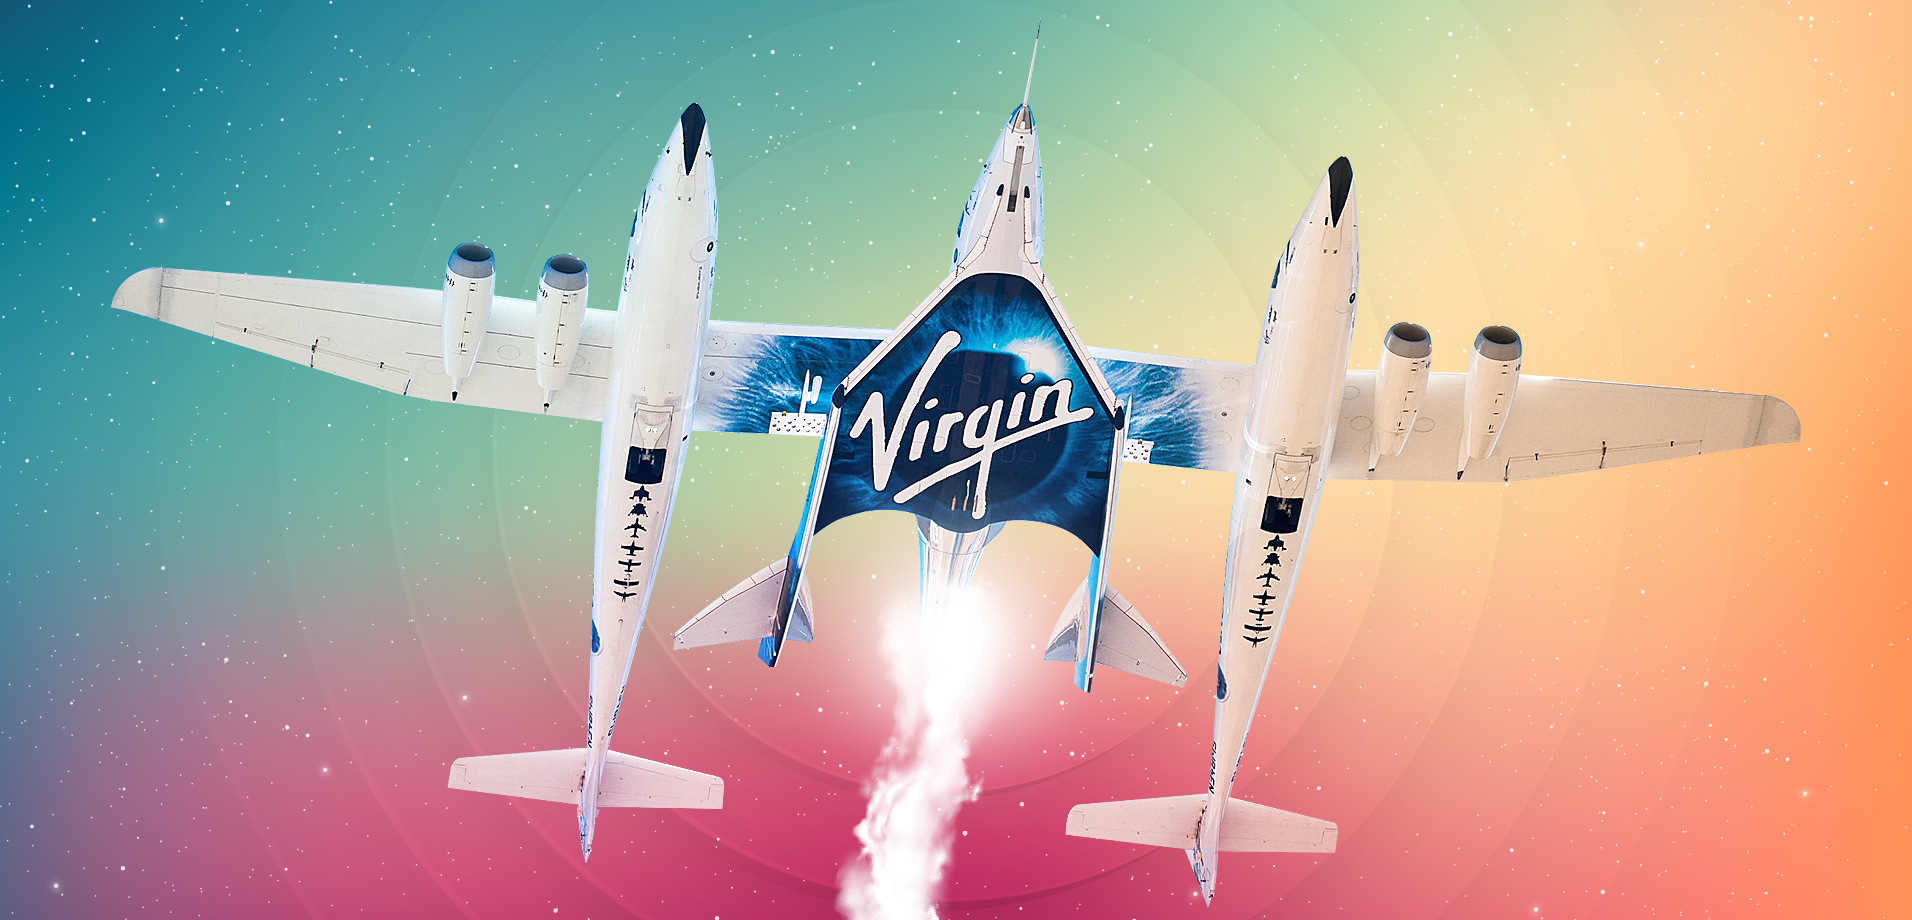 Virgin Galactic’s ‘Galactic 01’ Mission Is Ready For Take-Off